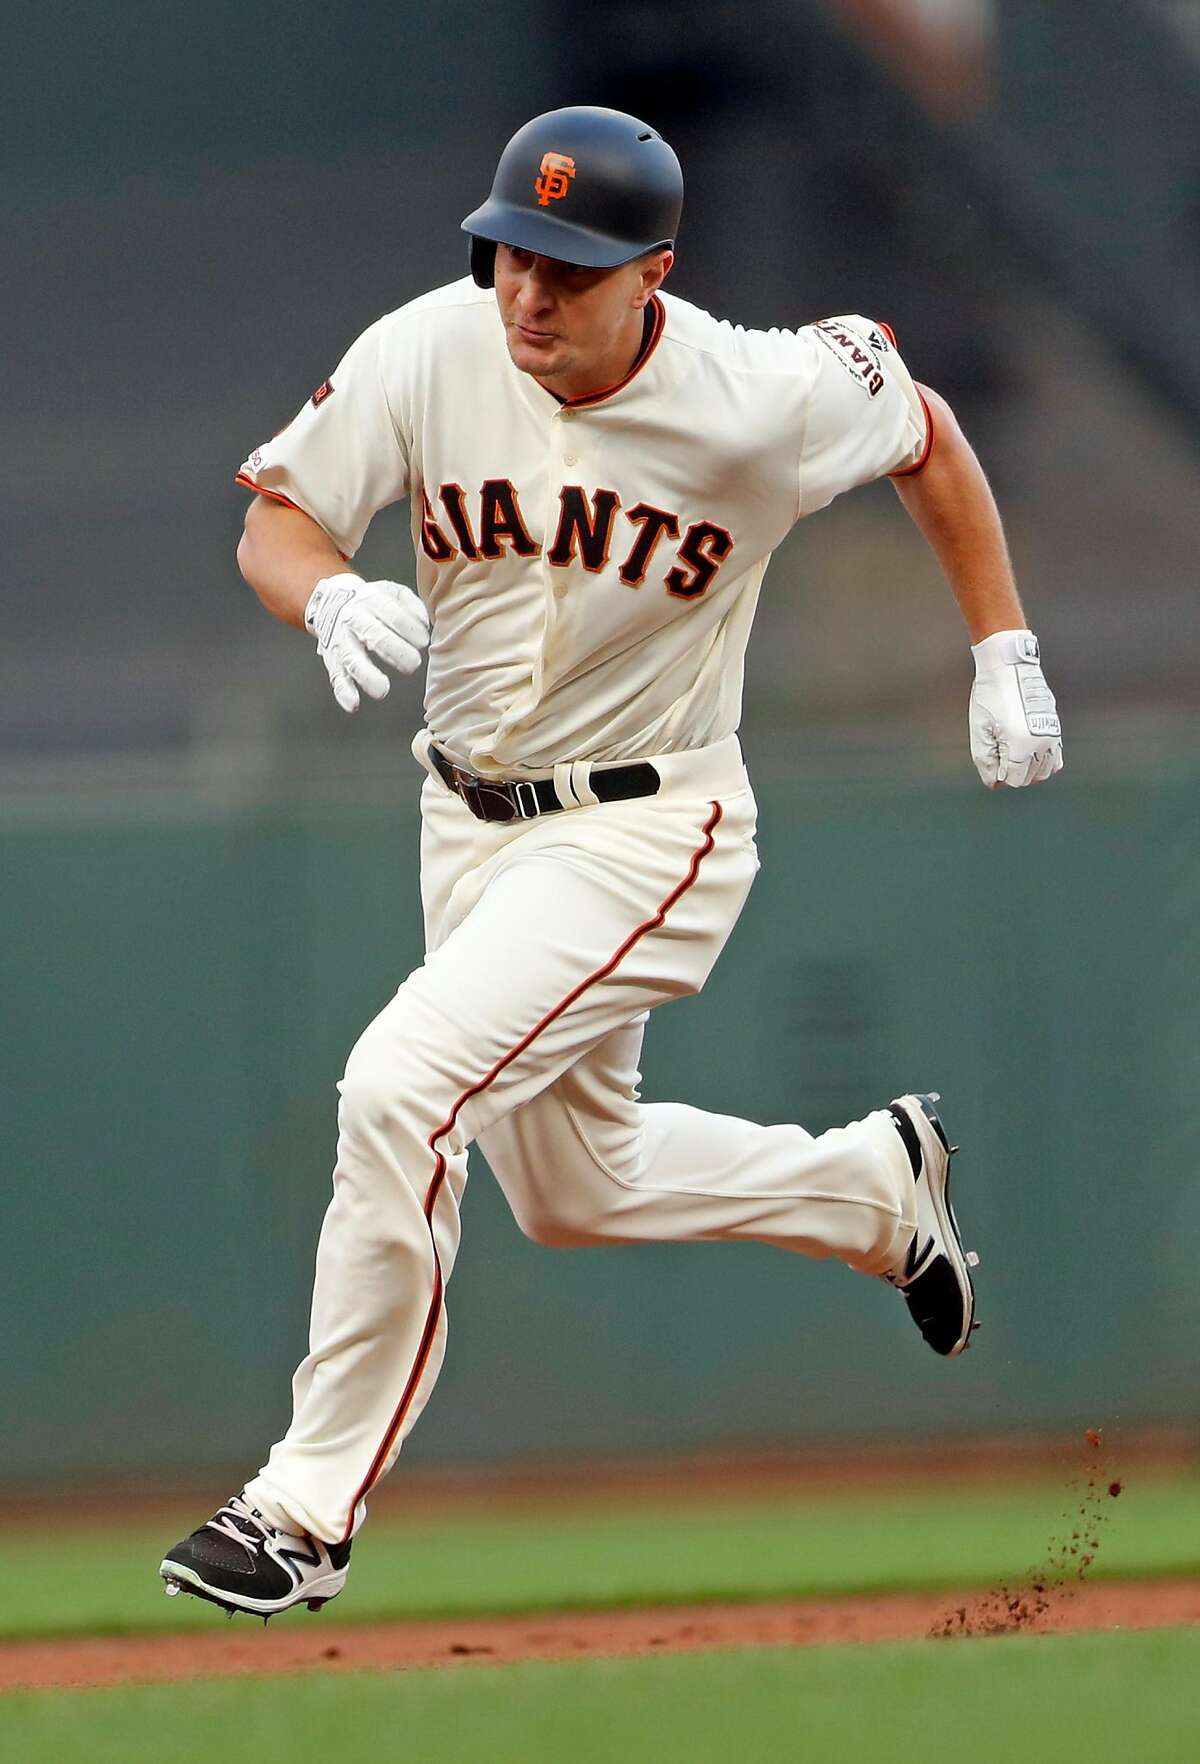 San Francisco Giants' Alex Dickerson legs outs a triple in 2nd inning against New York Mets during MLB game at Oracle Park in San Francisco, Calif., on Thursday, July 18, 2019.